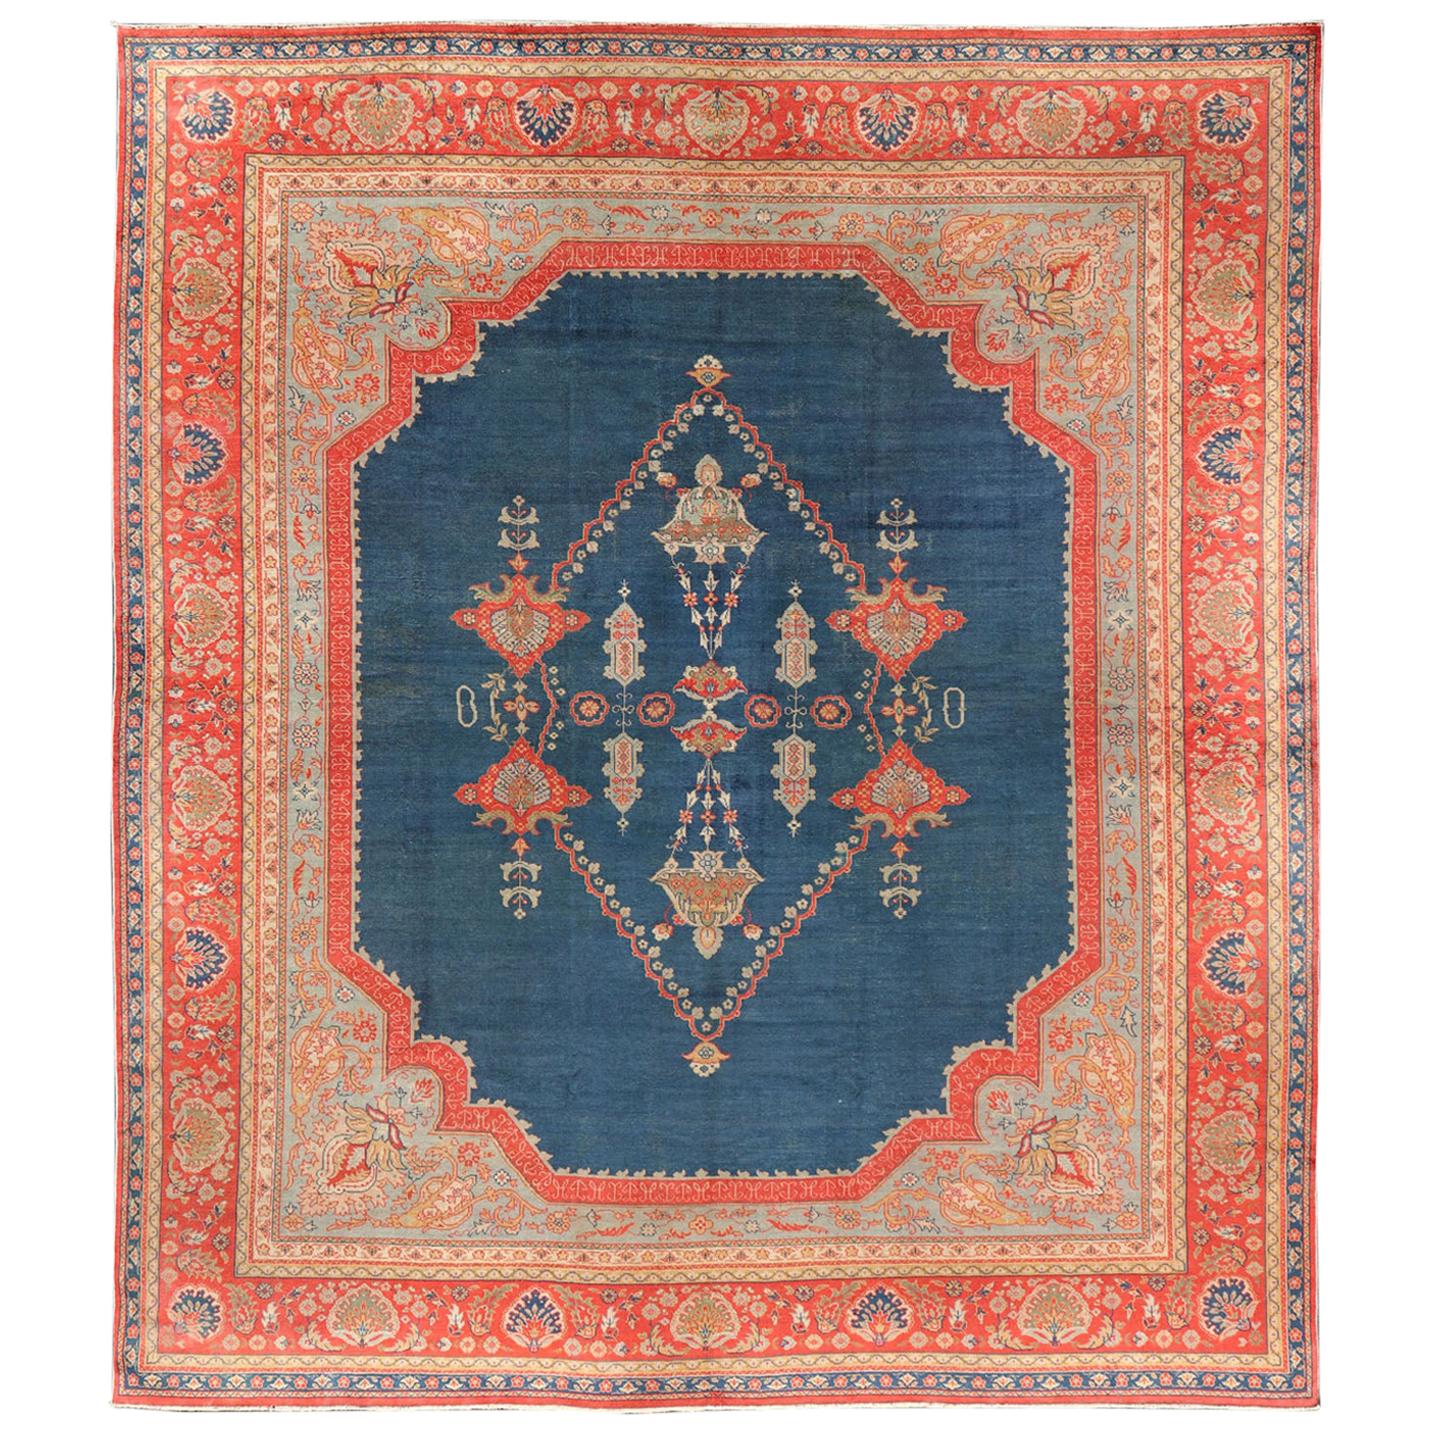 Large Antique Turkish Oushak Rug in Blue and Red with Ornate Medallion Design For Sale